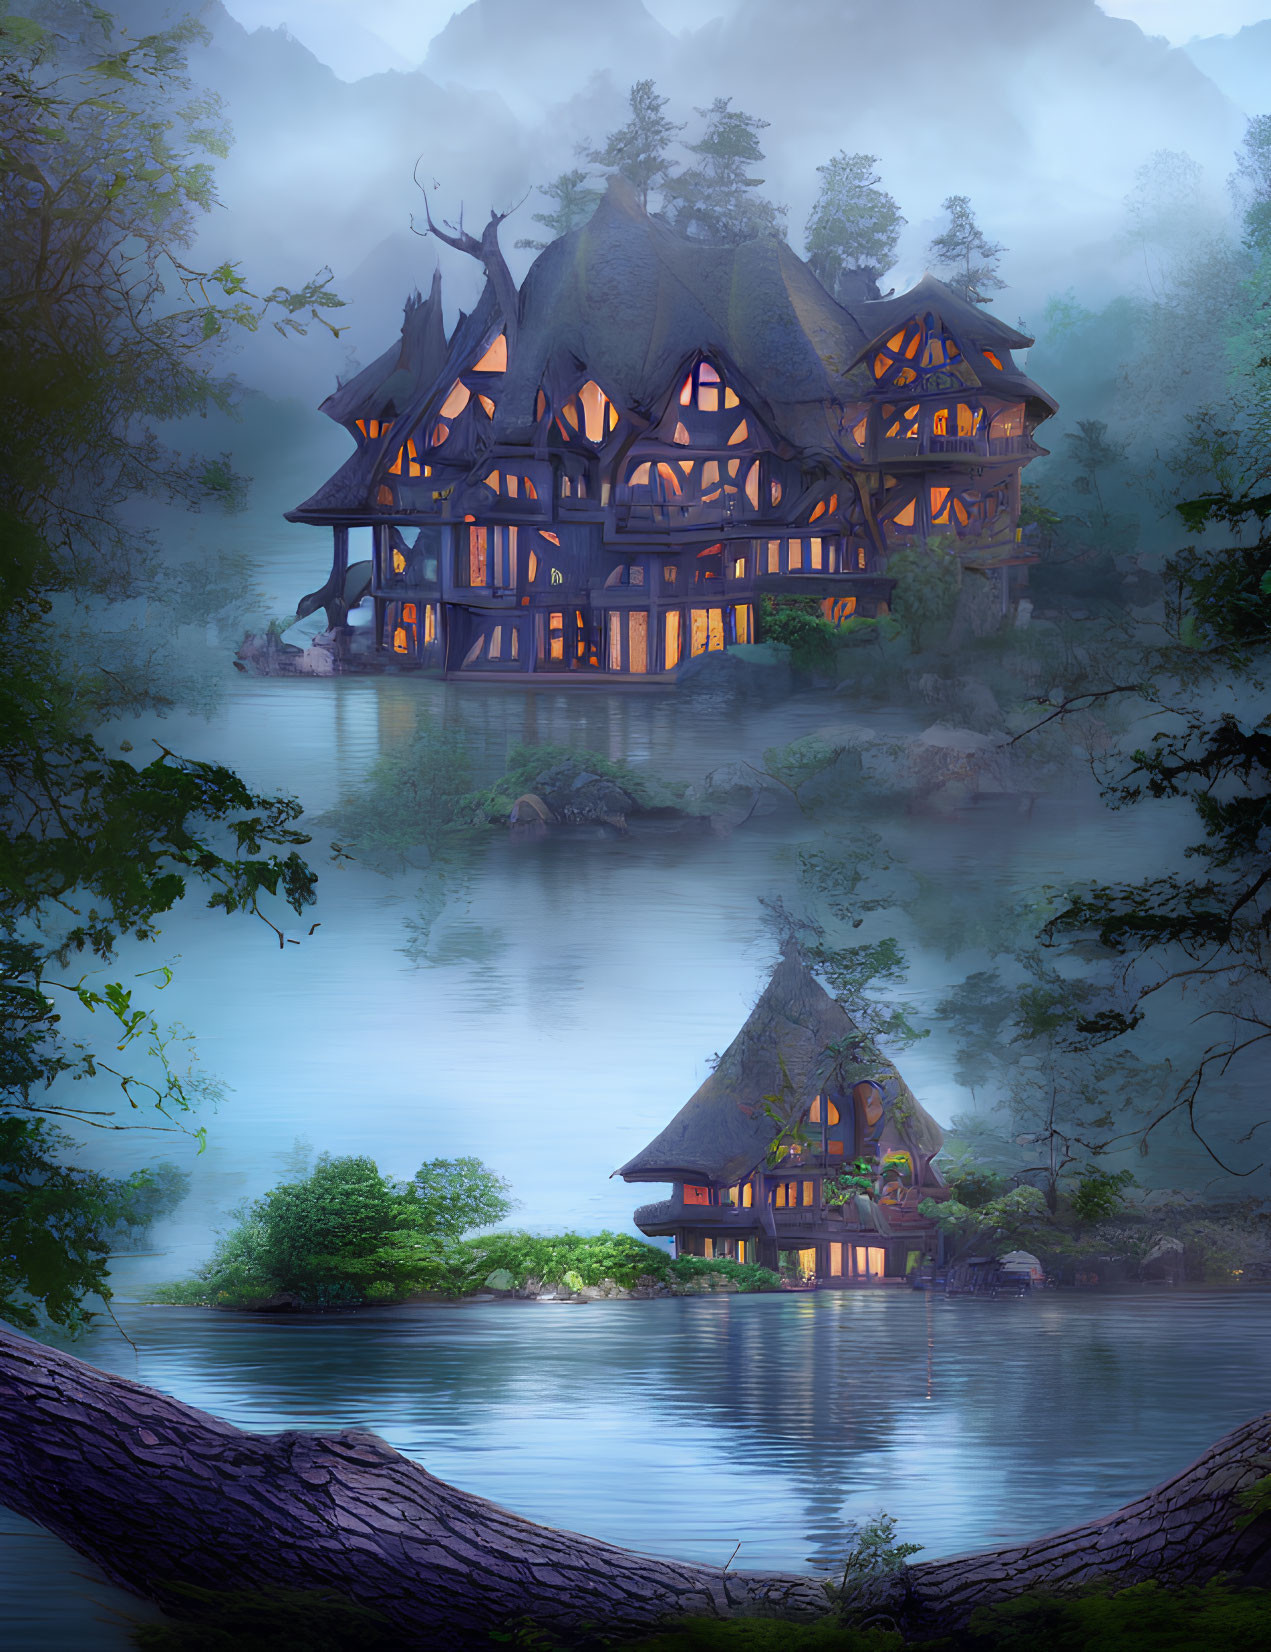 Enchanting fairytale cottage in misty woods by serene lake